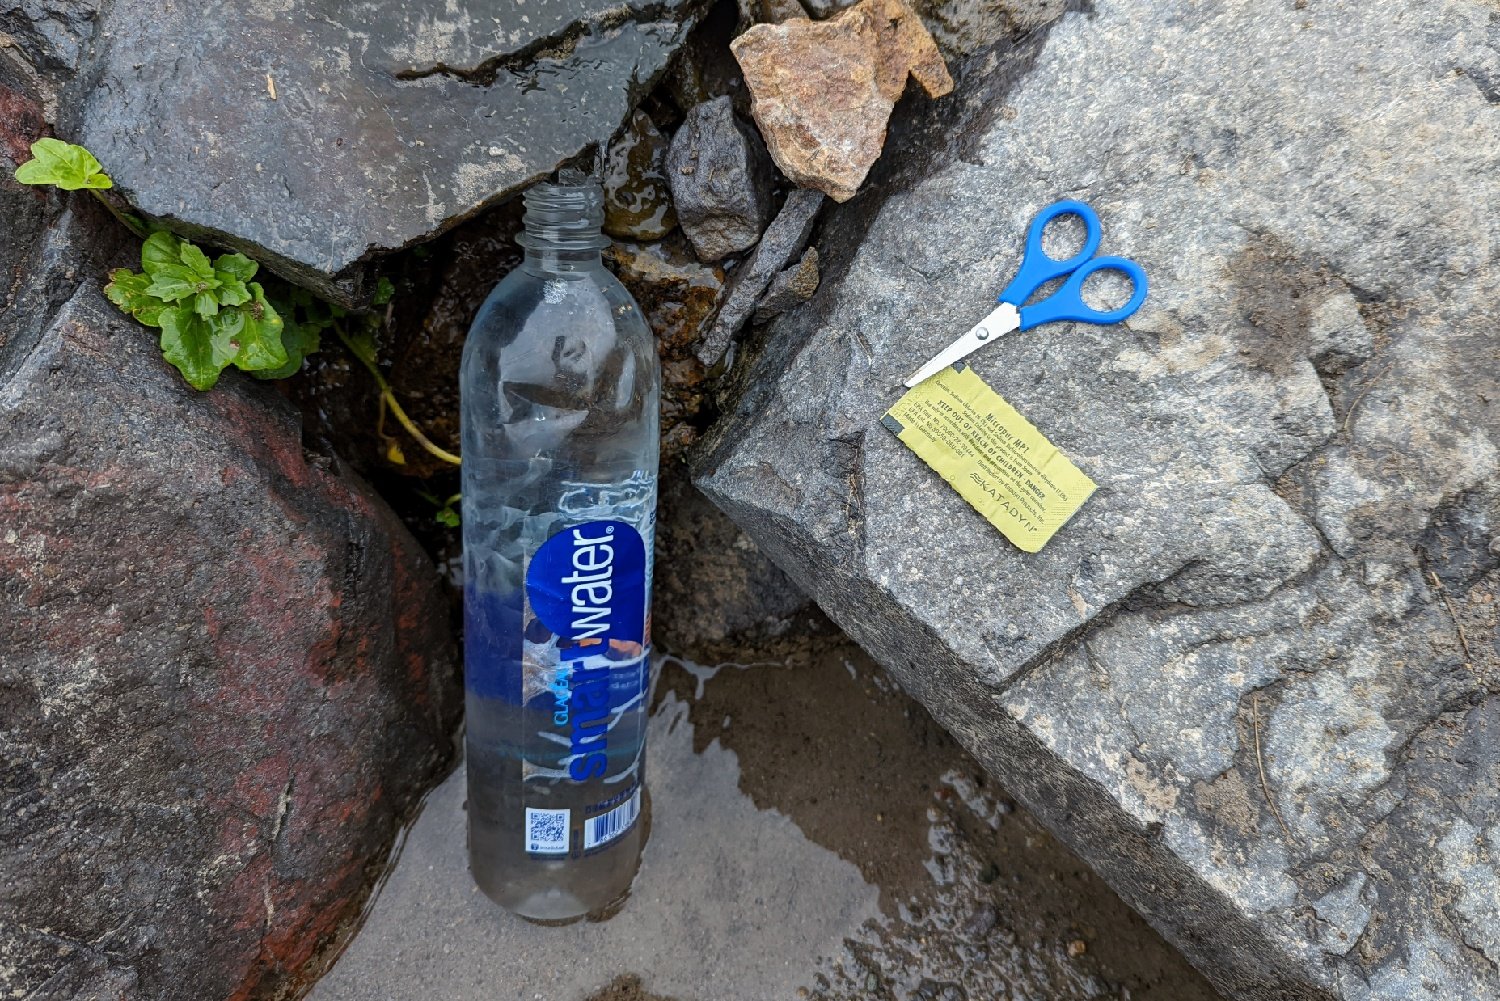 A Smartwater Bottle getting filled by a stream with some Katadyn Micropur Tablets and mini scissors next to it